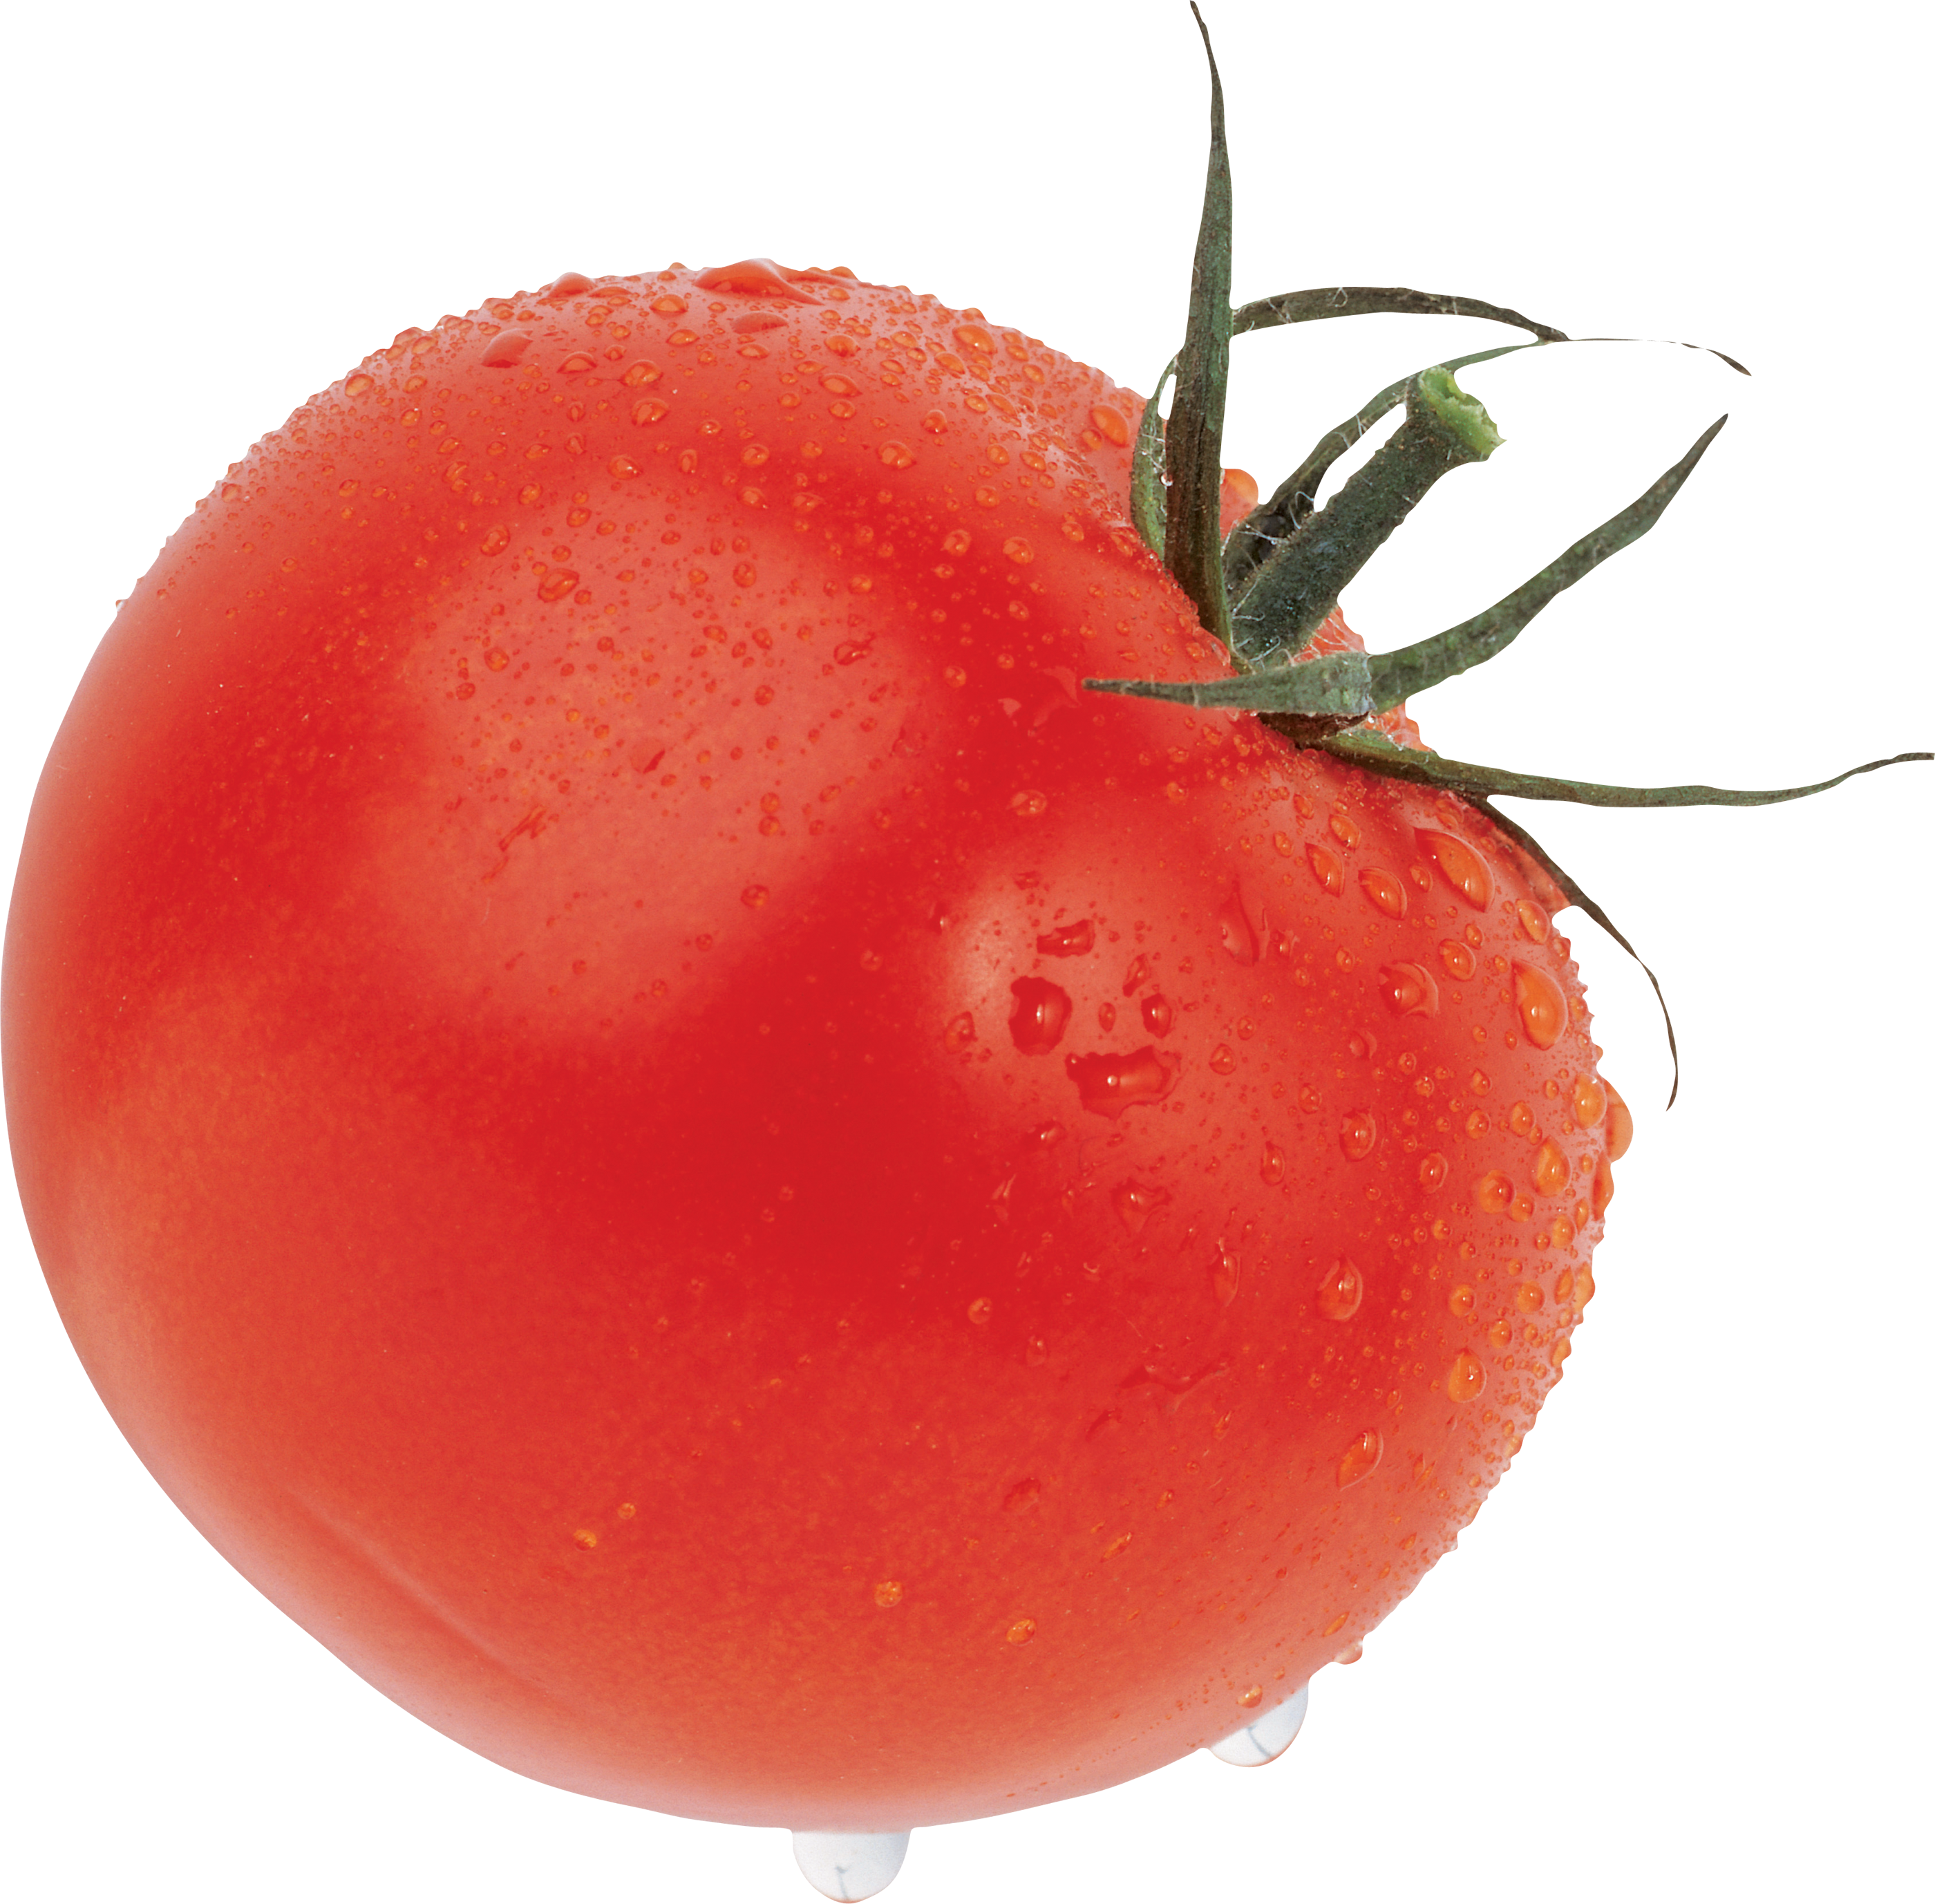 Tomate grosse rouge